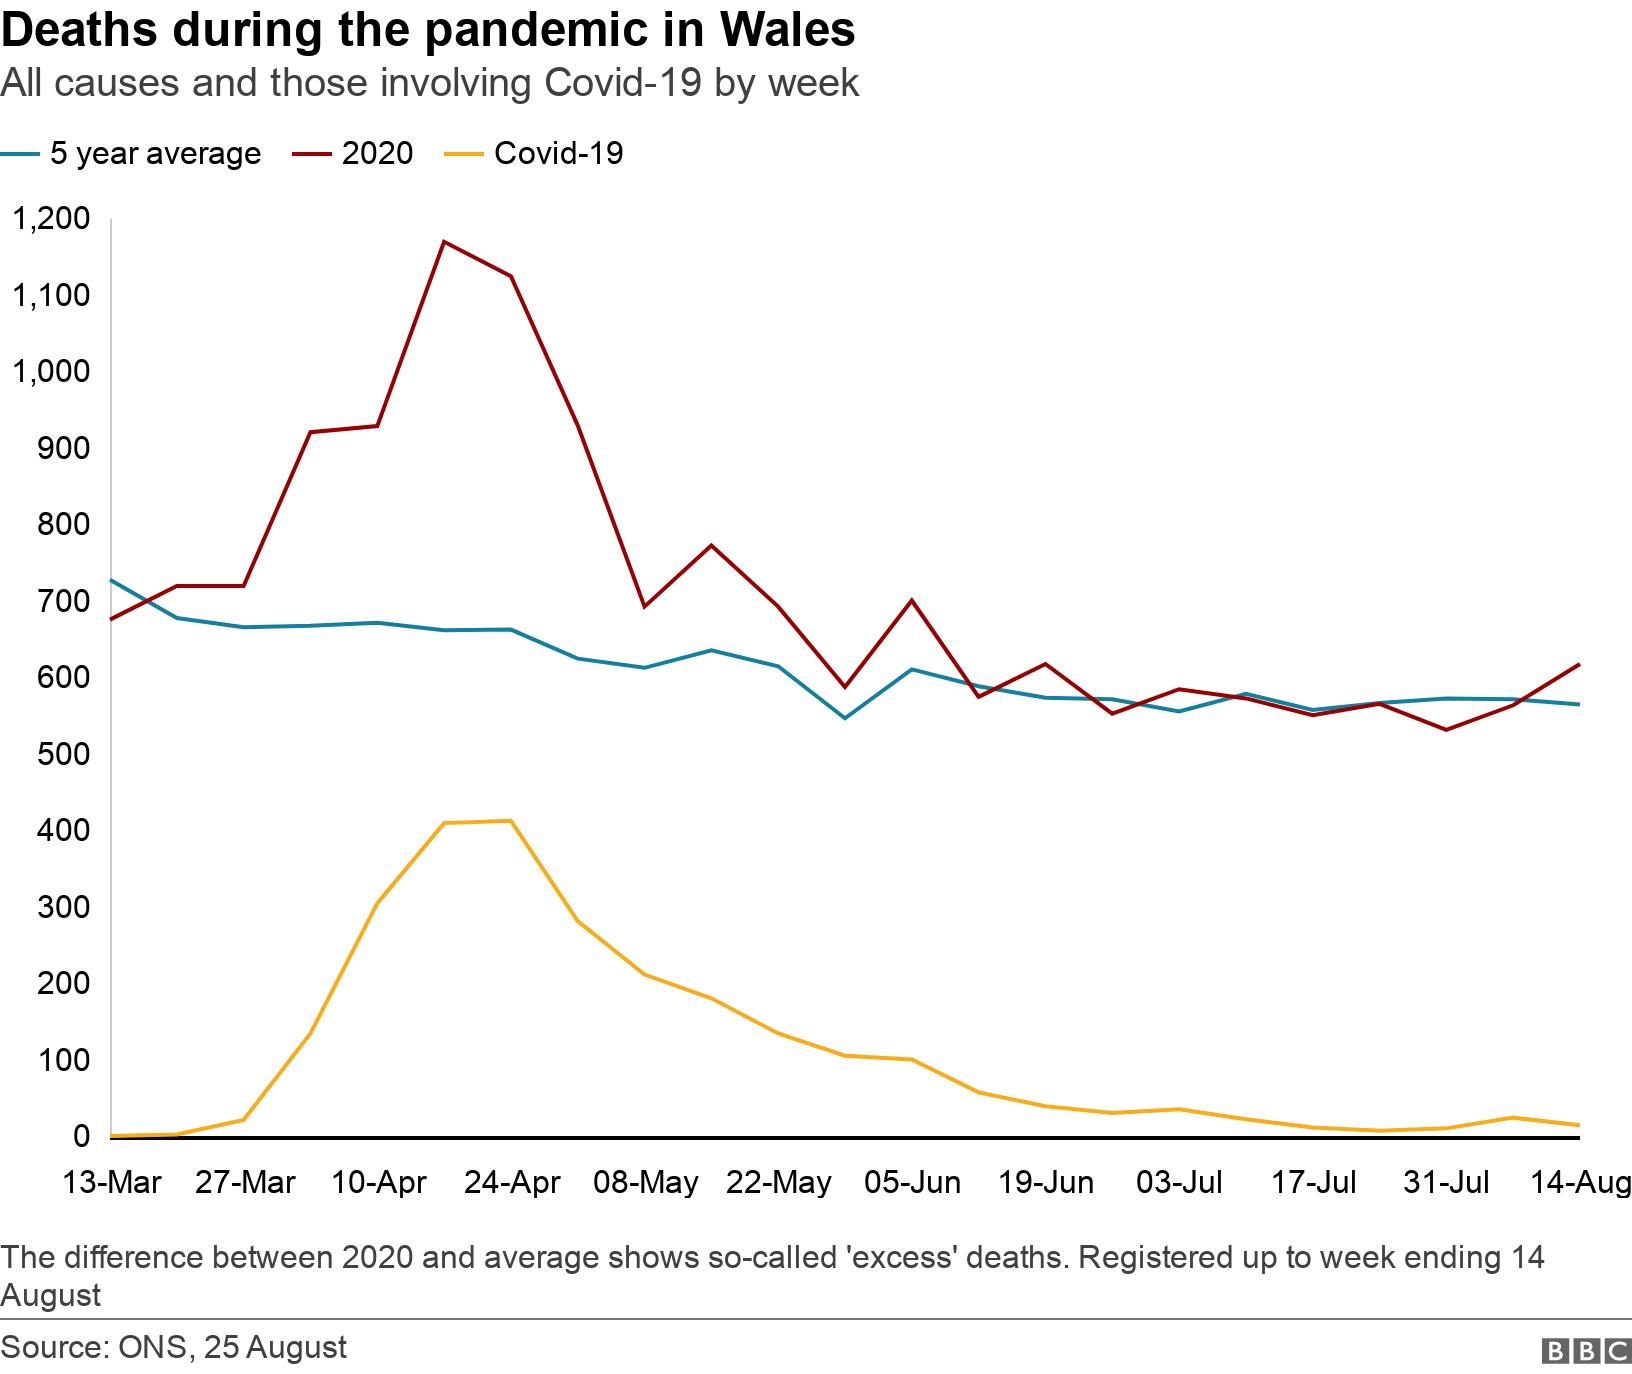 Deaths during the pandemic in Wales. All causes and those involving Covid-19 by week.  The difference between 2020 and average shows so-called 'excess' deaths. Registered up to week ending 14 August.